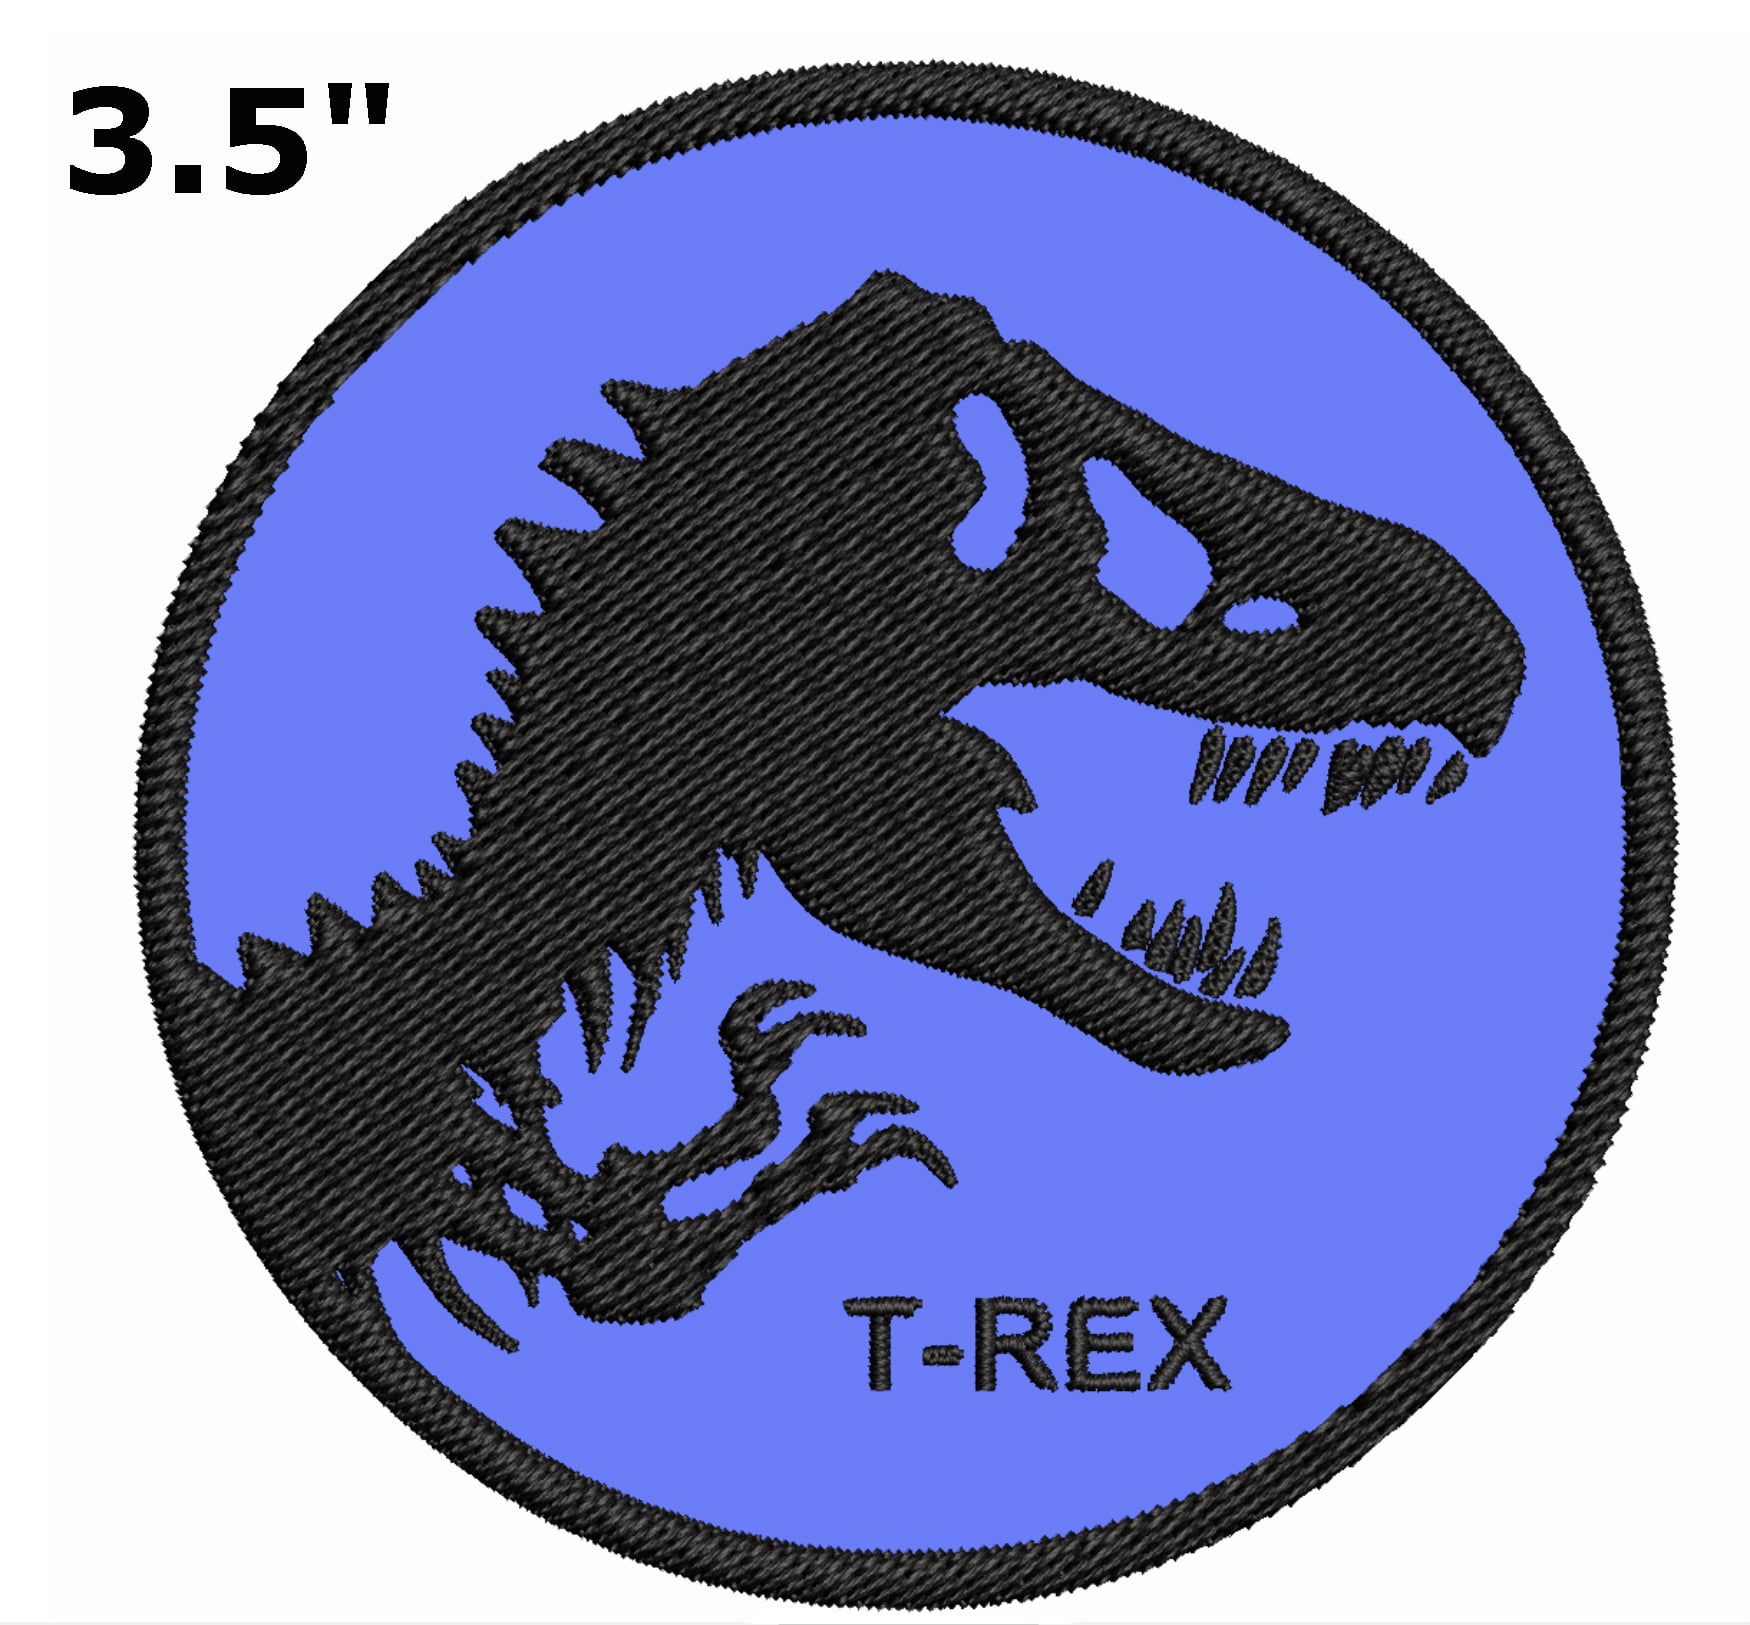 Jurassic World Park Uniform/Costume Patch 2 3/4 inches wide 